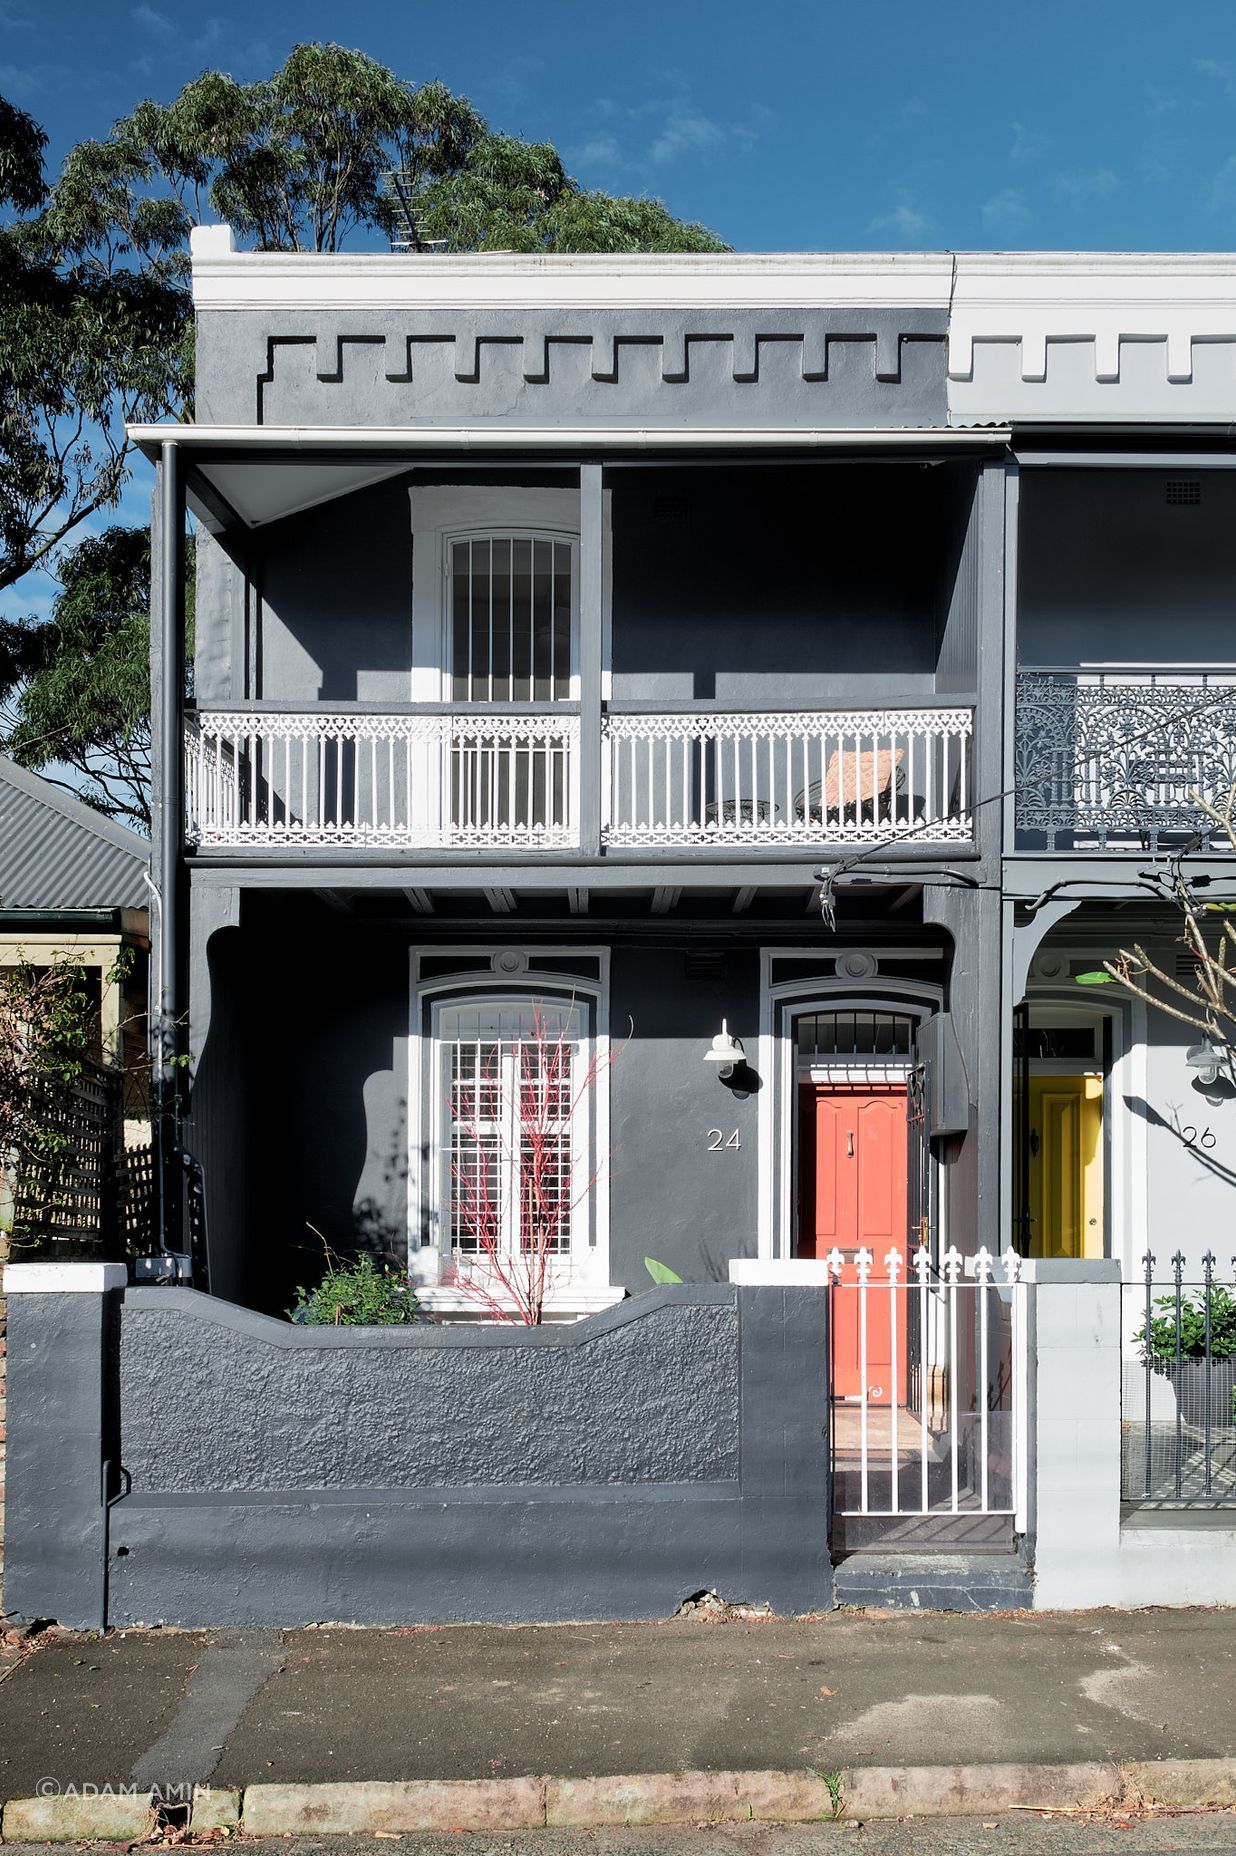 The Victorian terrace frontage, iconic to the streetscape, has been restored with modern hues.